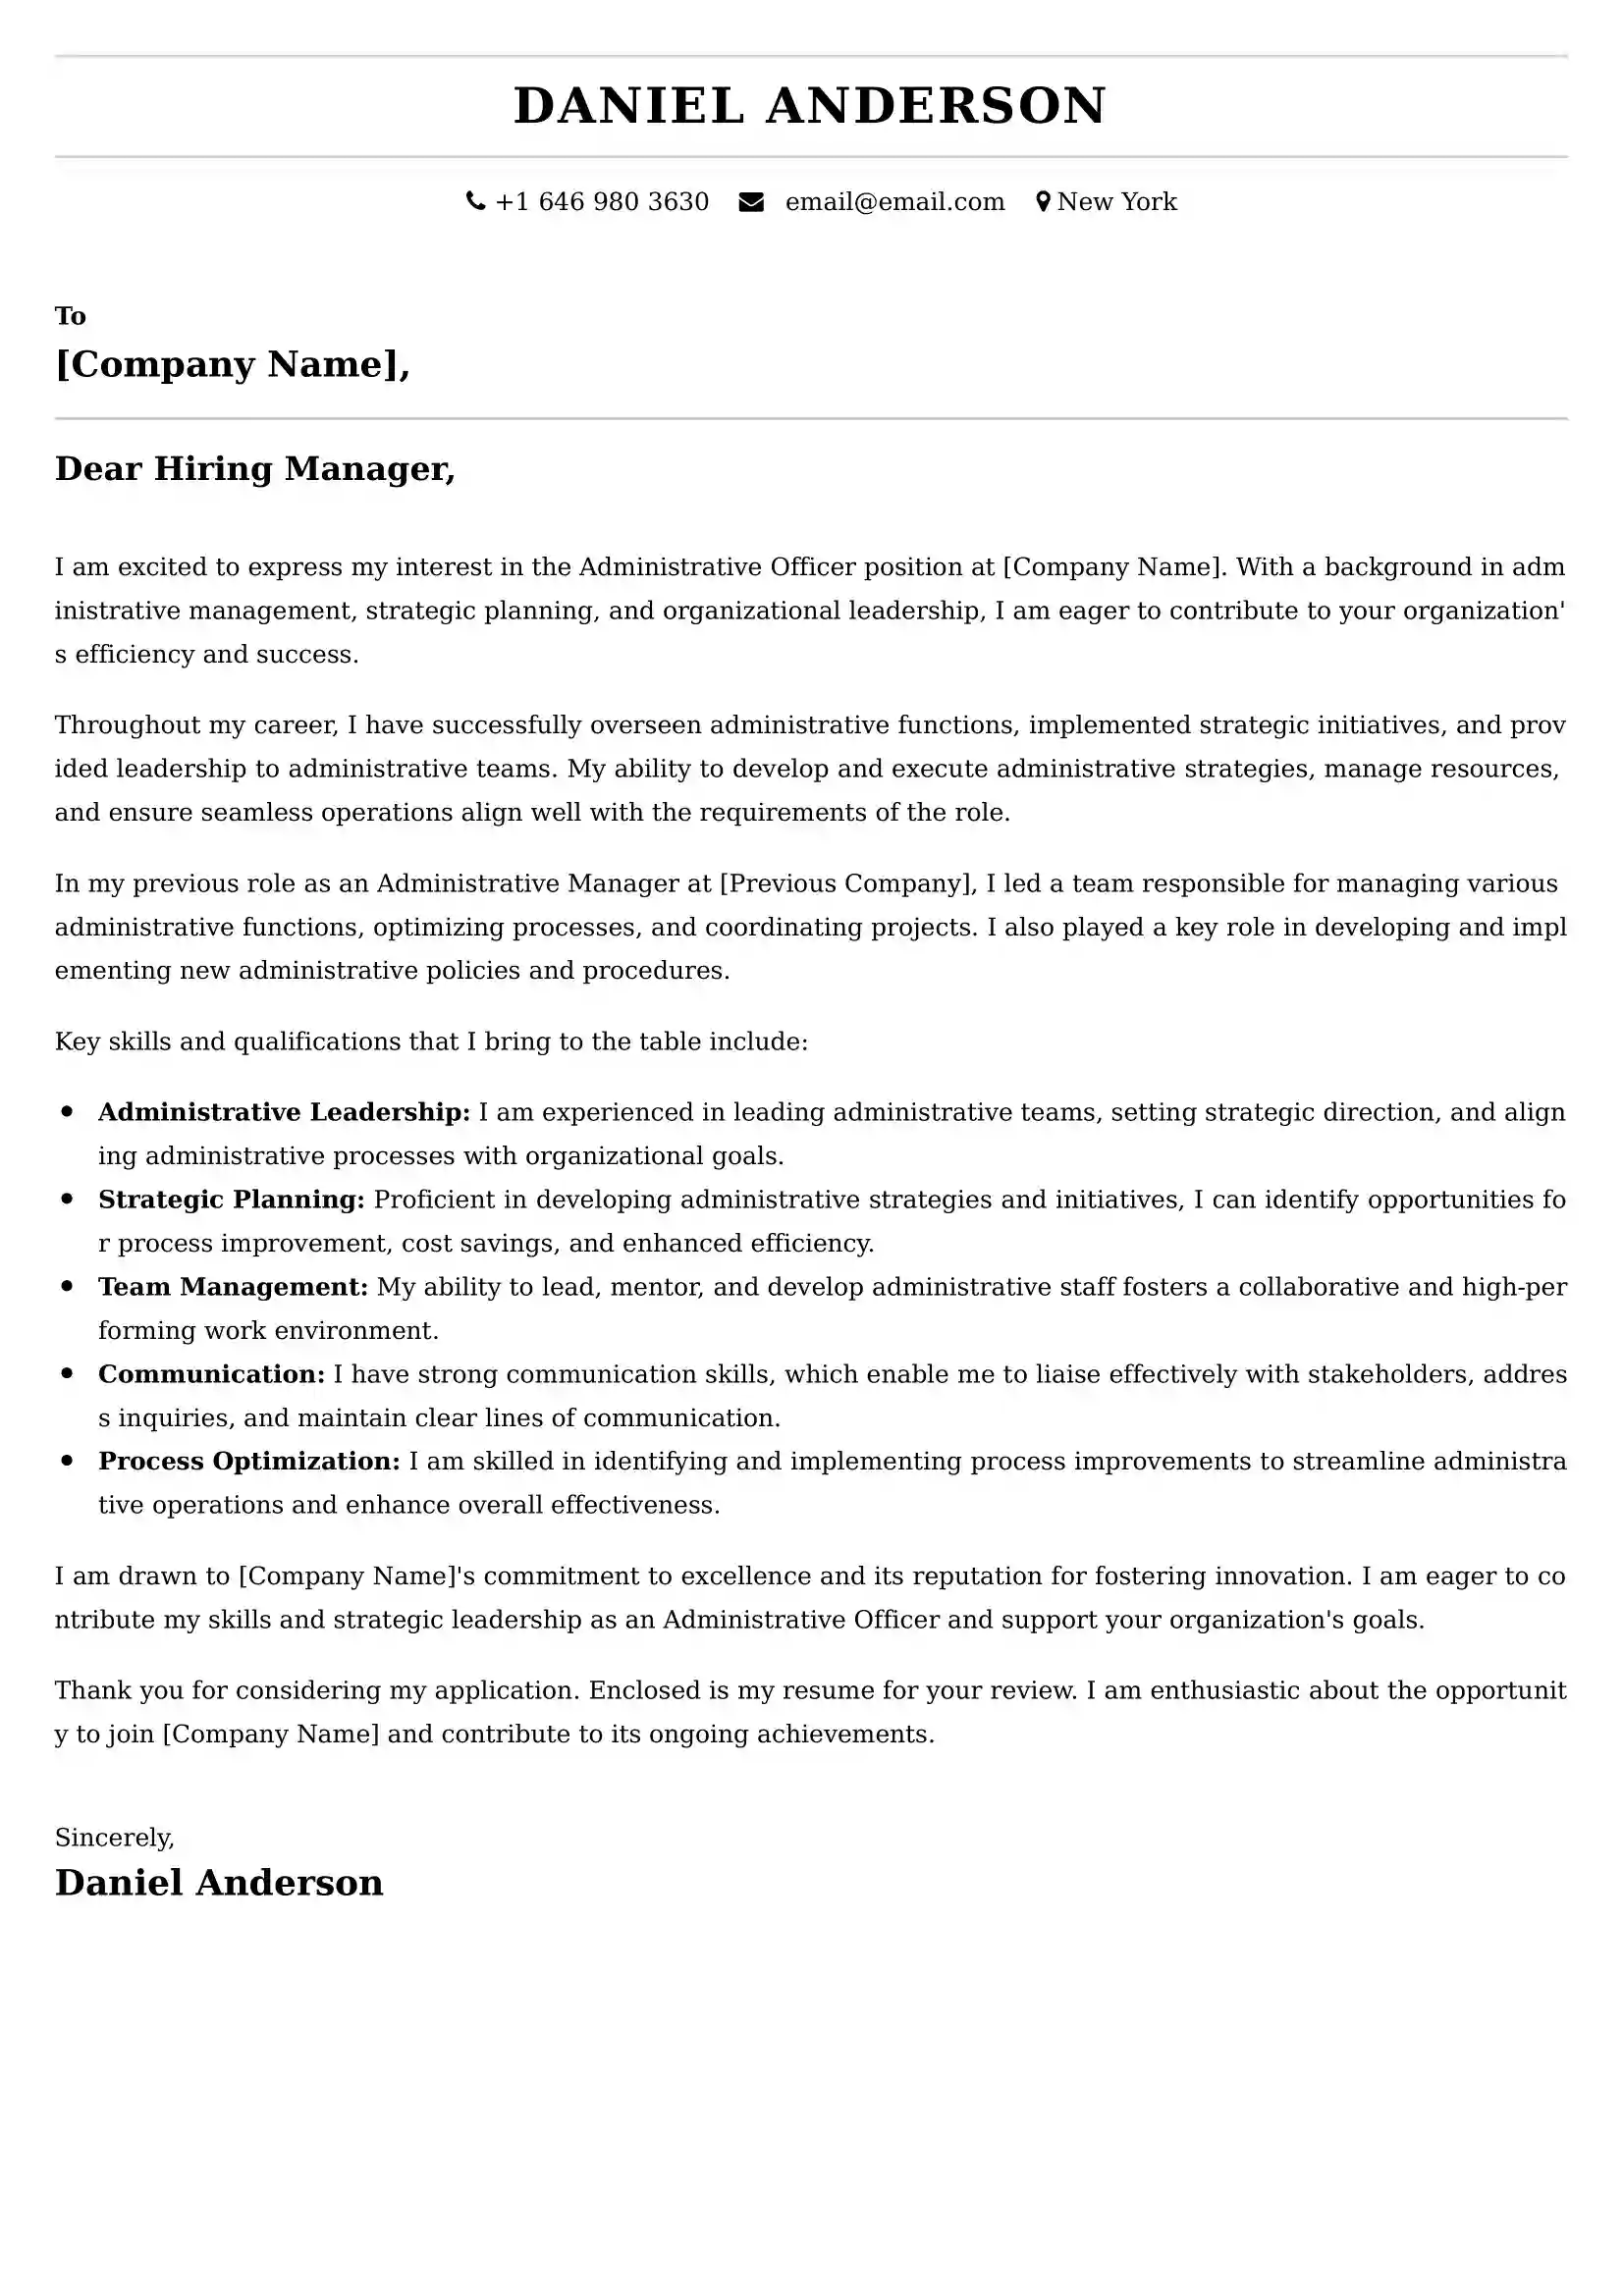 Administrative Officer Cover Letter Examples - Latest UK Format